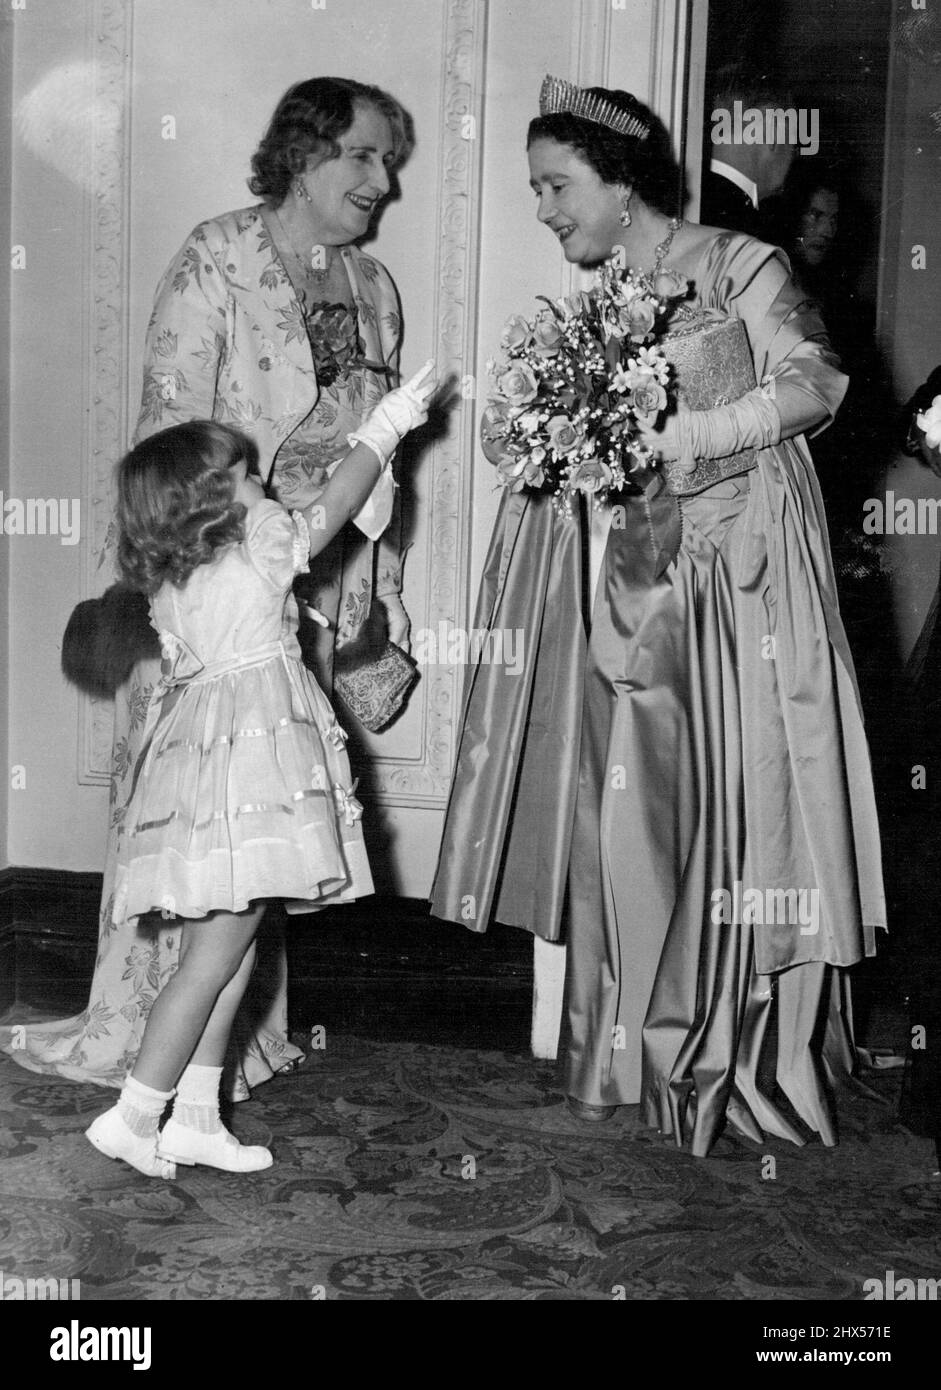 'Excuse me,' said little Sarah Osborn to the Queen Mother 'but what have you lot on your hair?' The Queen Mother replied: 'It's a tiara, my, dear.' Sarah, three-year-old daughter of Sir Danvers Osborn, had just presented a bouquet to the the Mother at a performance of 'Marie AntoiNette' at the Scala Theatre last night. December 03, 1953. (Photo by Daily Mirror). Stock Photo